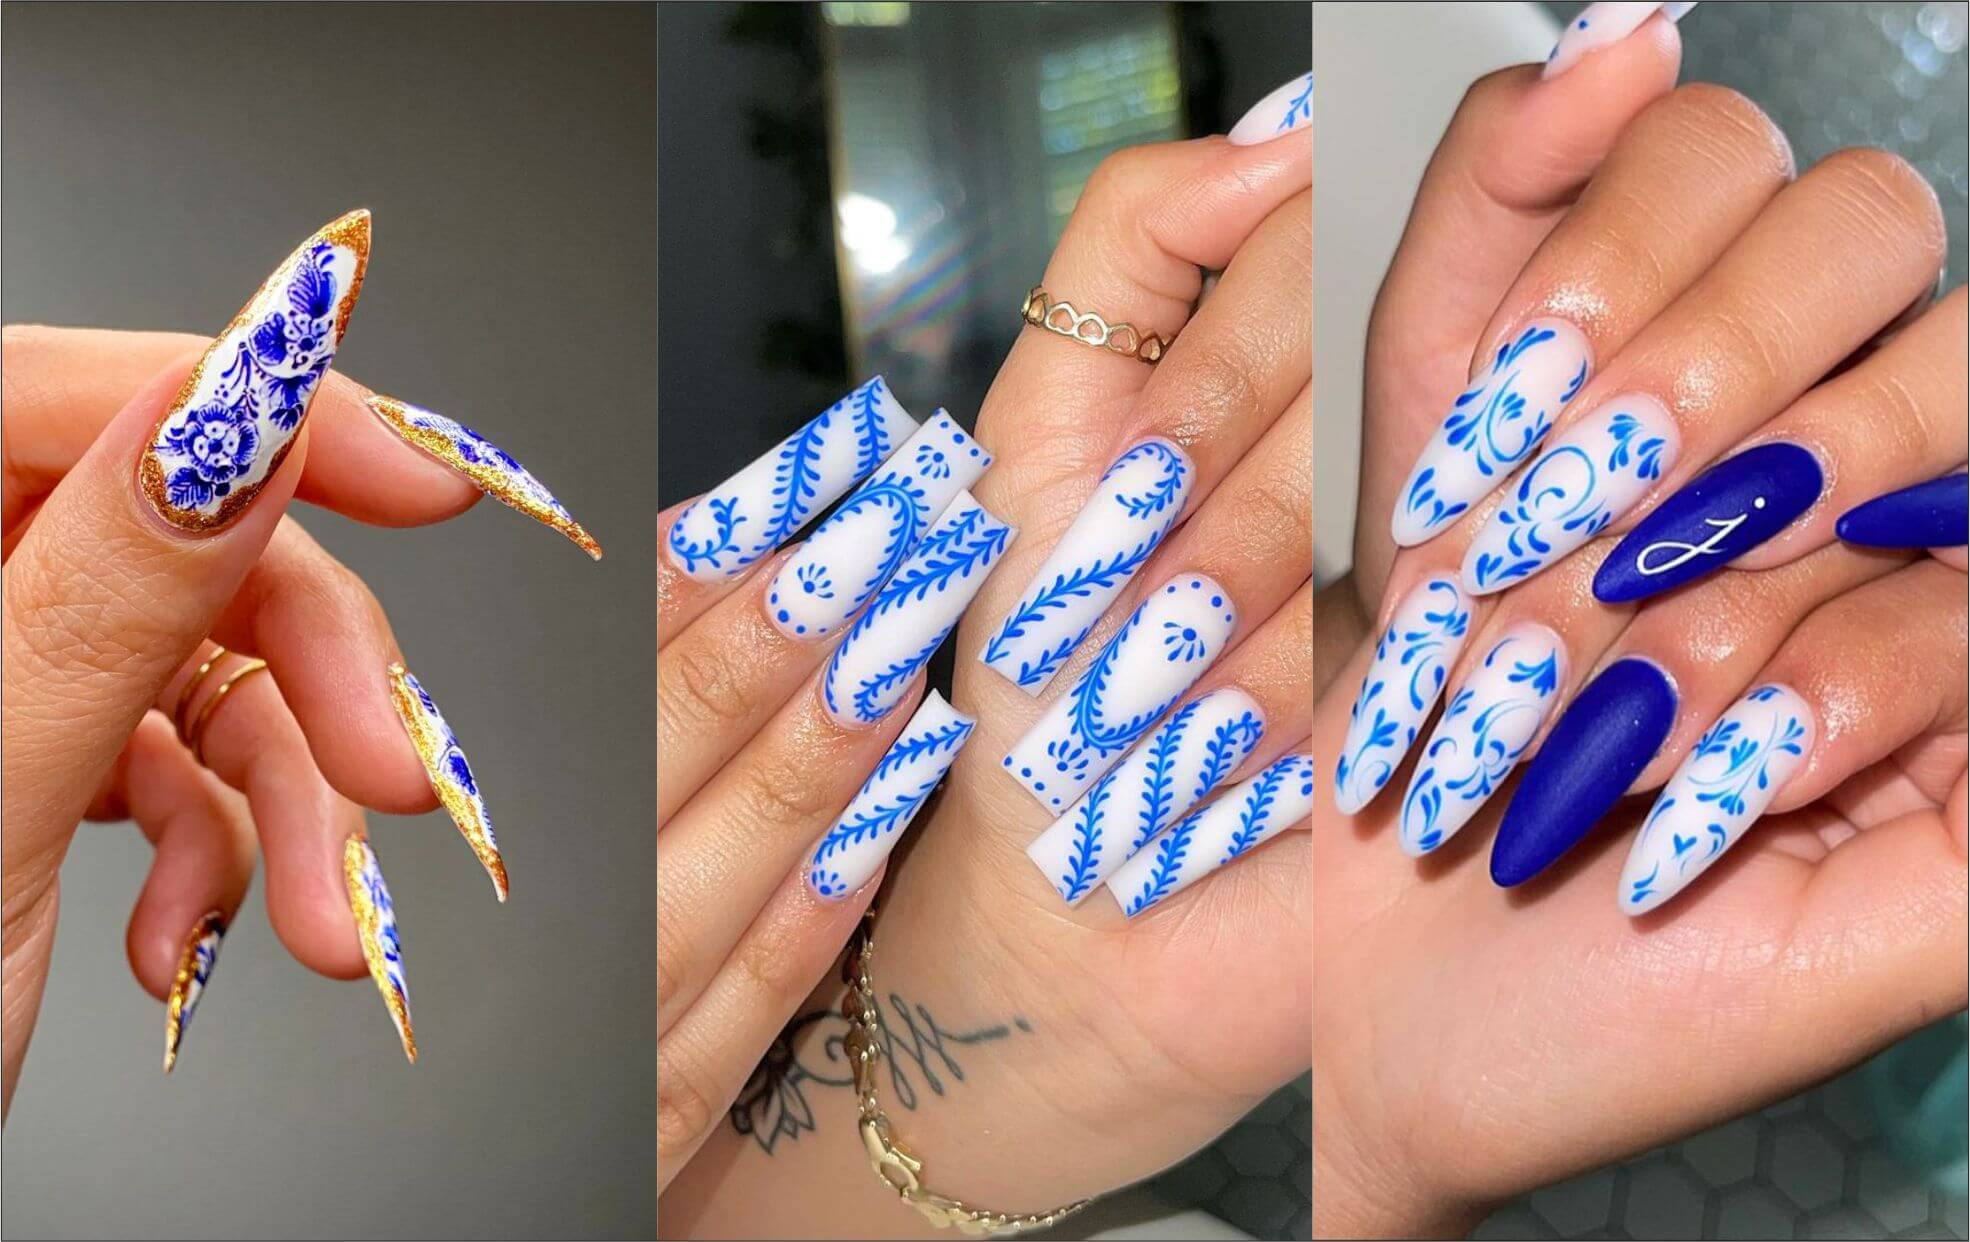 5 Winter Nail Art Ideas To Inspire Your Next Manicure